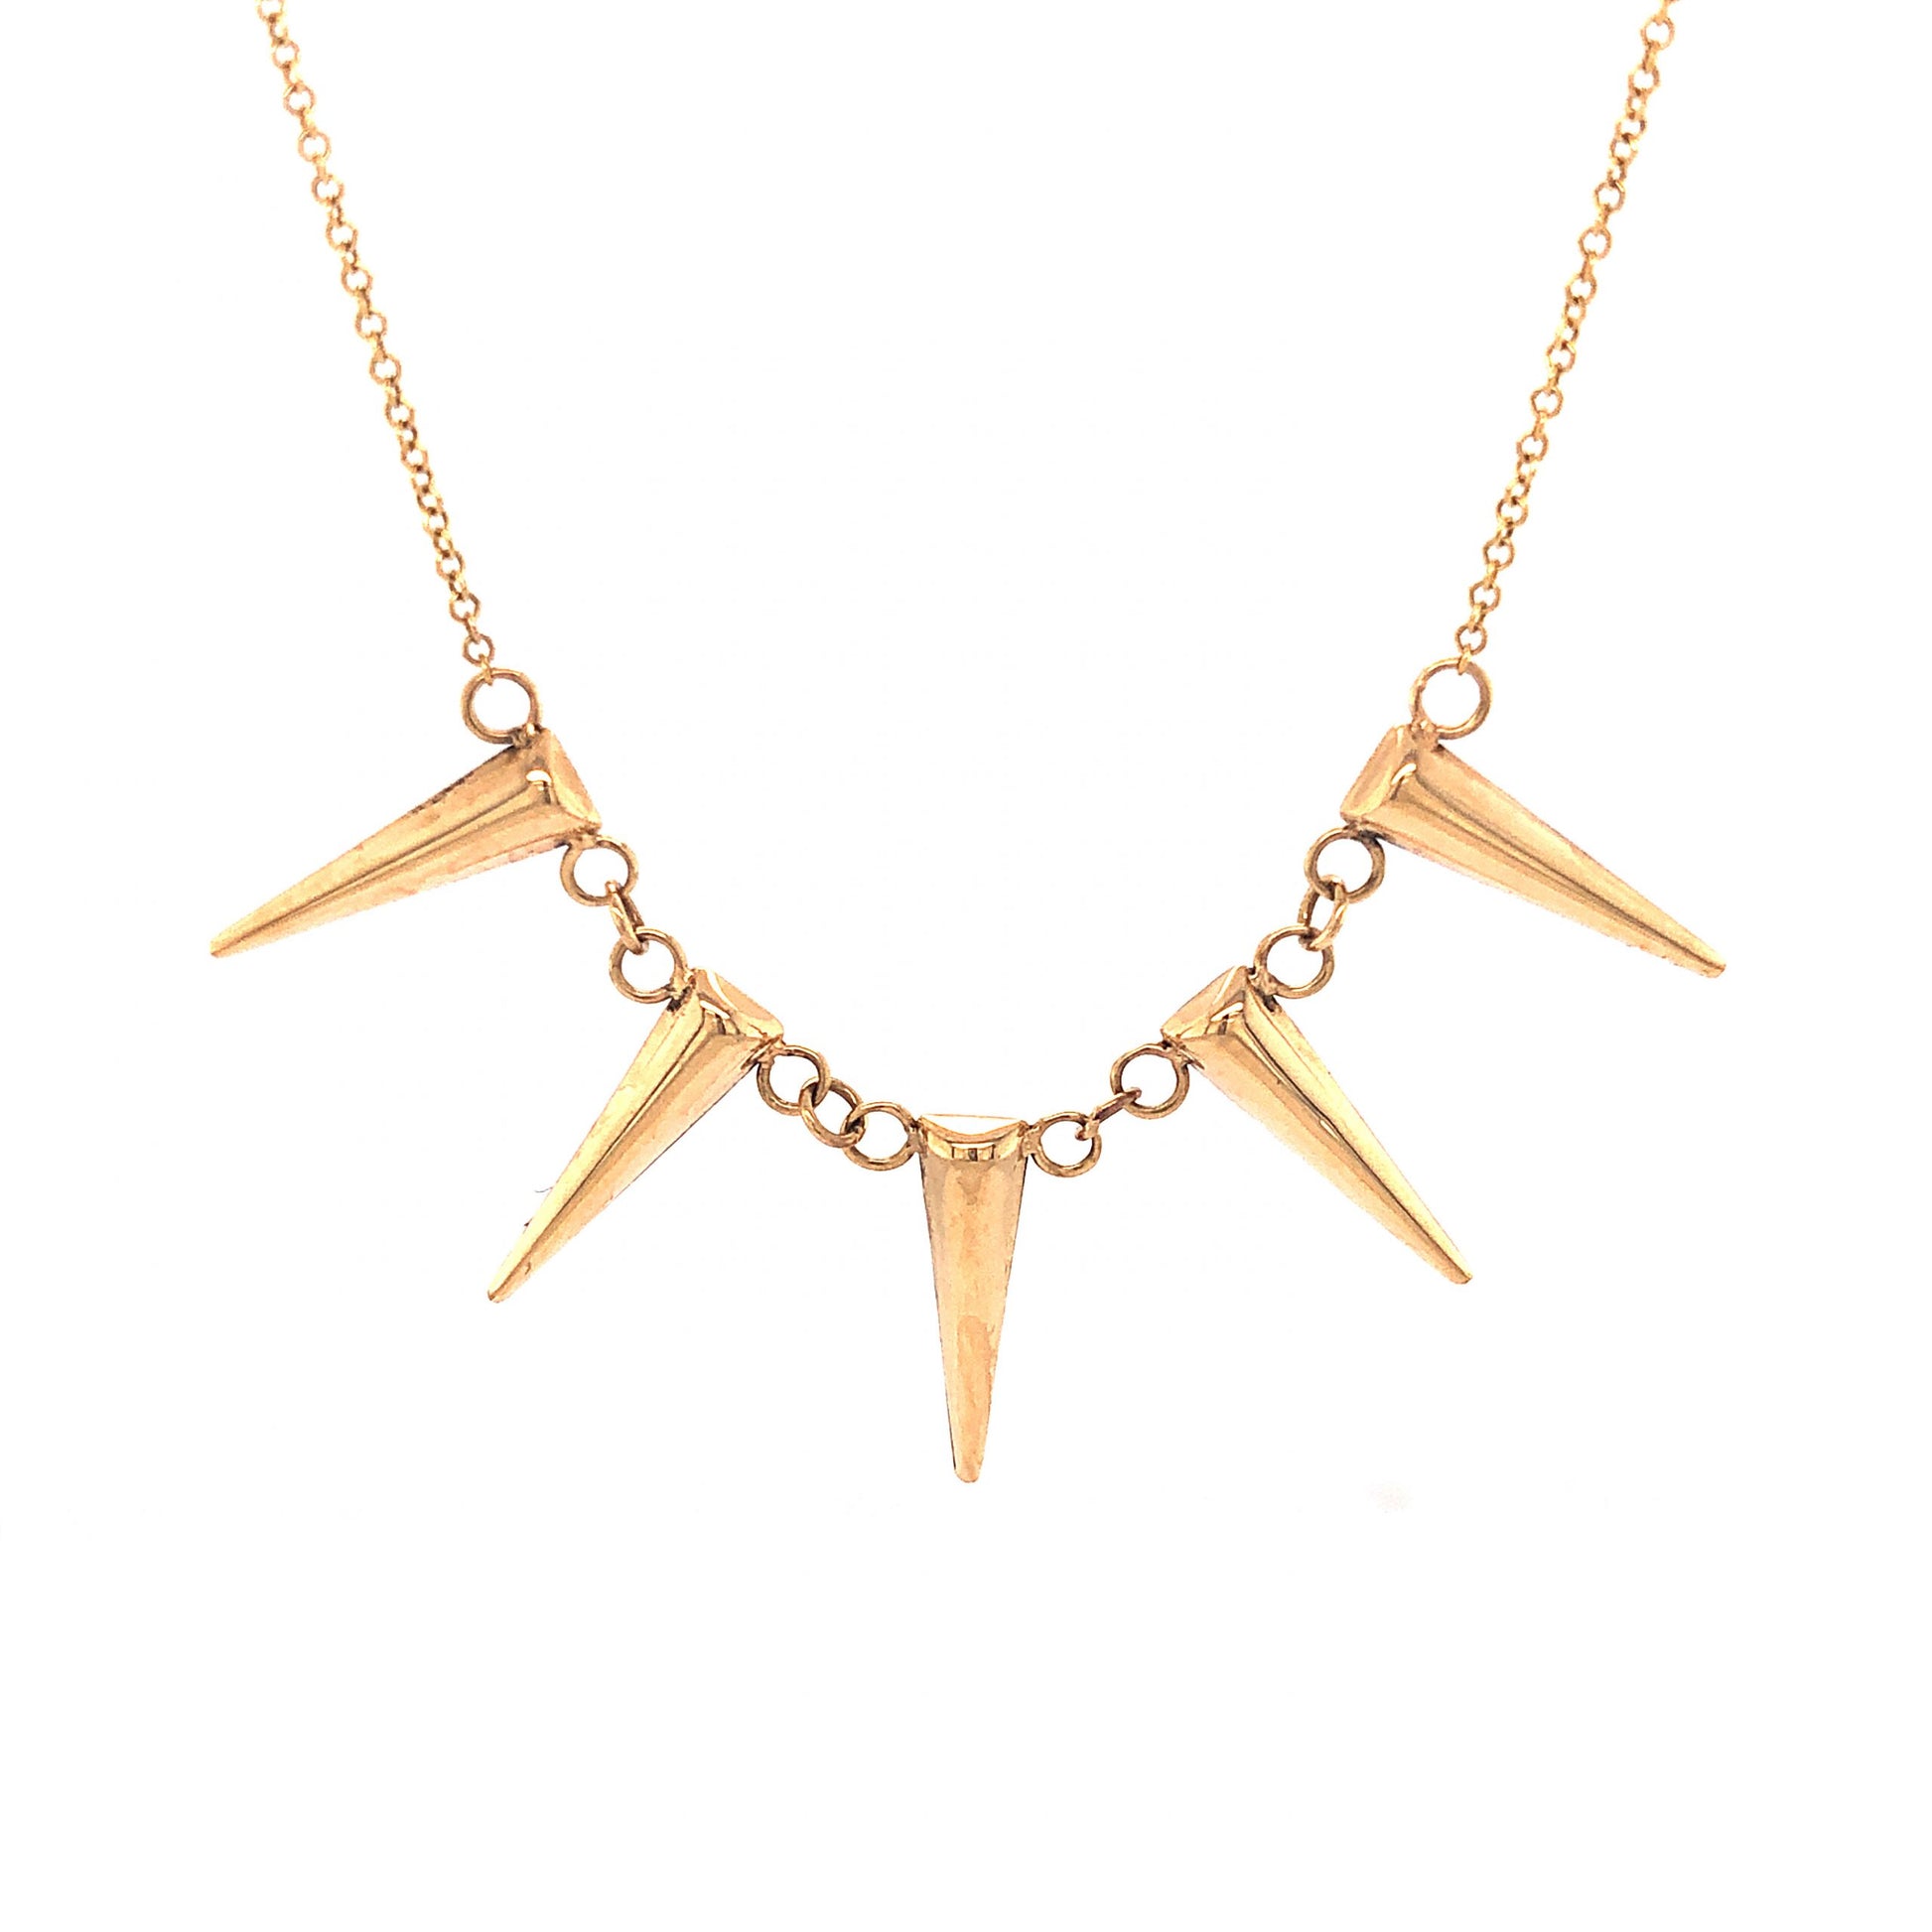 16 Inch Spike Necklace in 14k Yellow GoldComposition: 14 Karat Yellow GoldTotal Gram Weight: 2.7 gInscription: RL 585